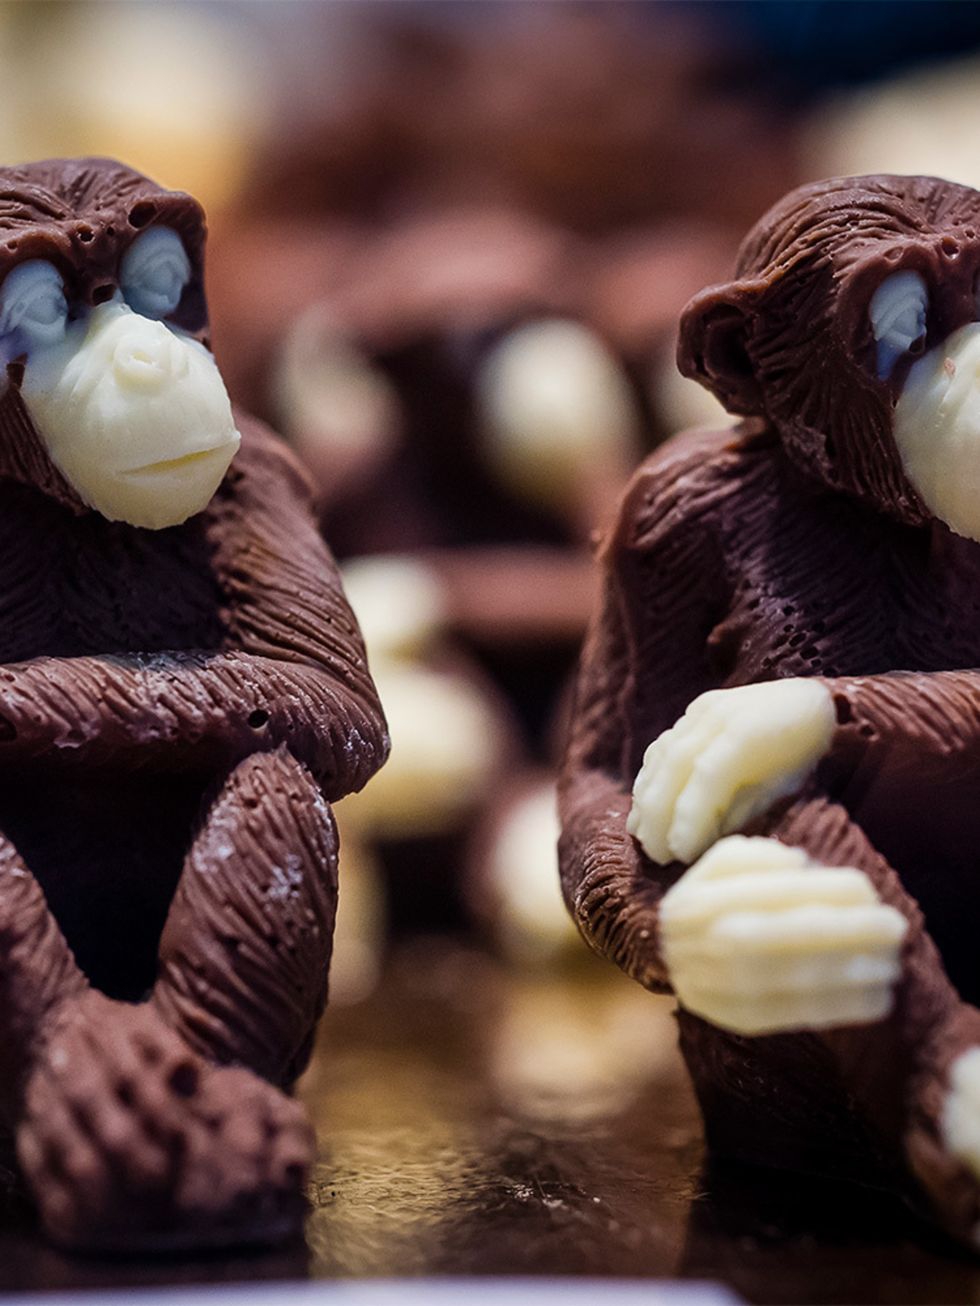 <p><strong>FOOD: The Chocolate Show</strong></p>

<p>The greatest chocolate show on the planet returns to London this weekend, so make sure you save your stomach as the line-up includes tastings, truffle rolling, demonstrations and even chocolate couture 